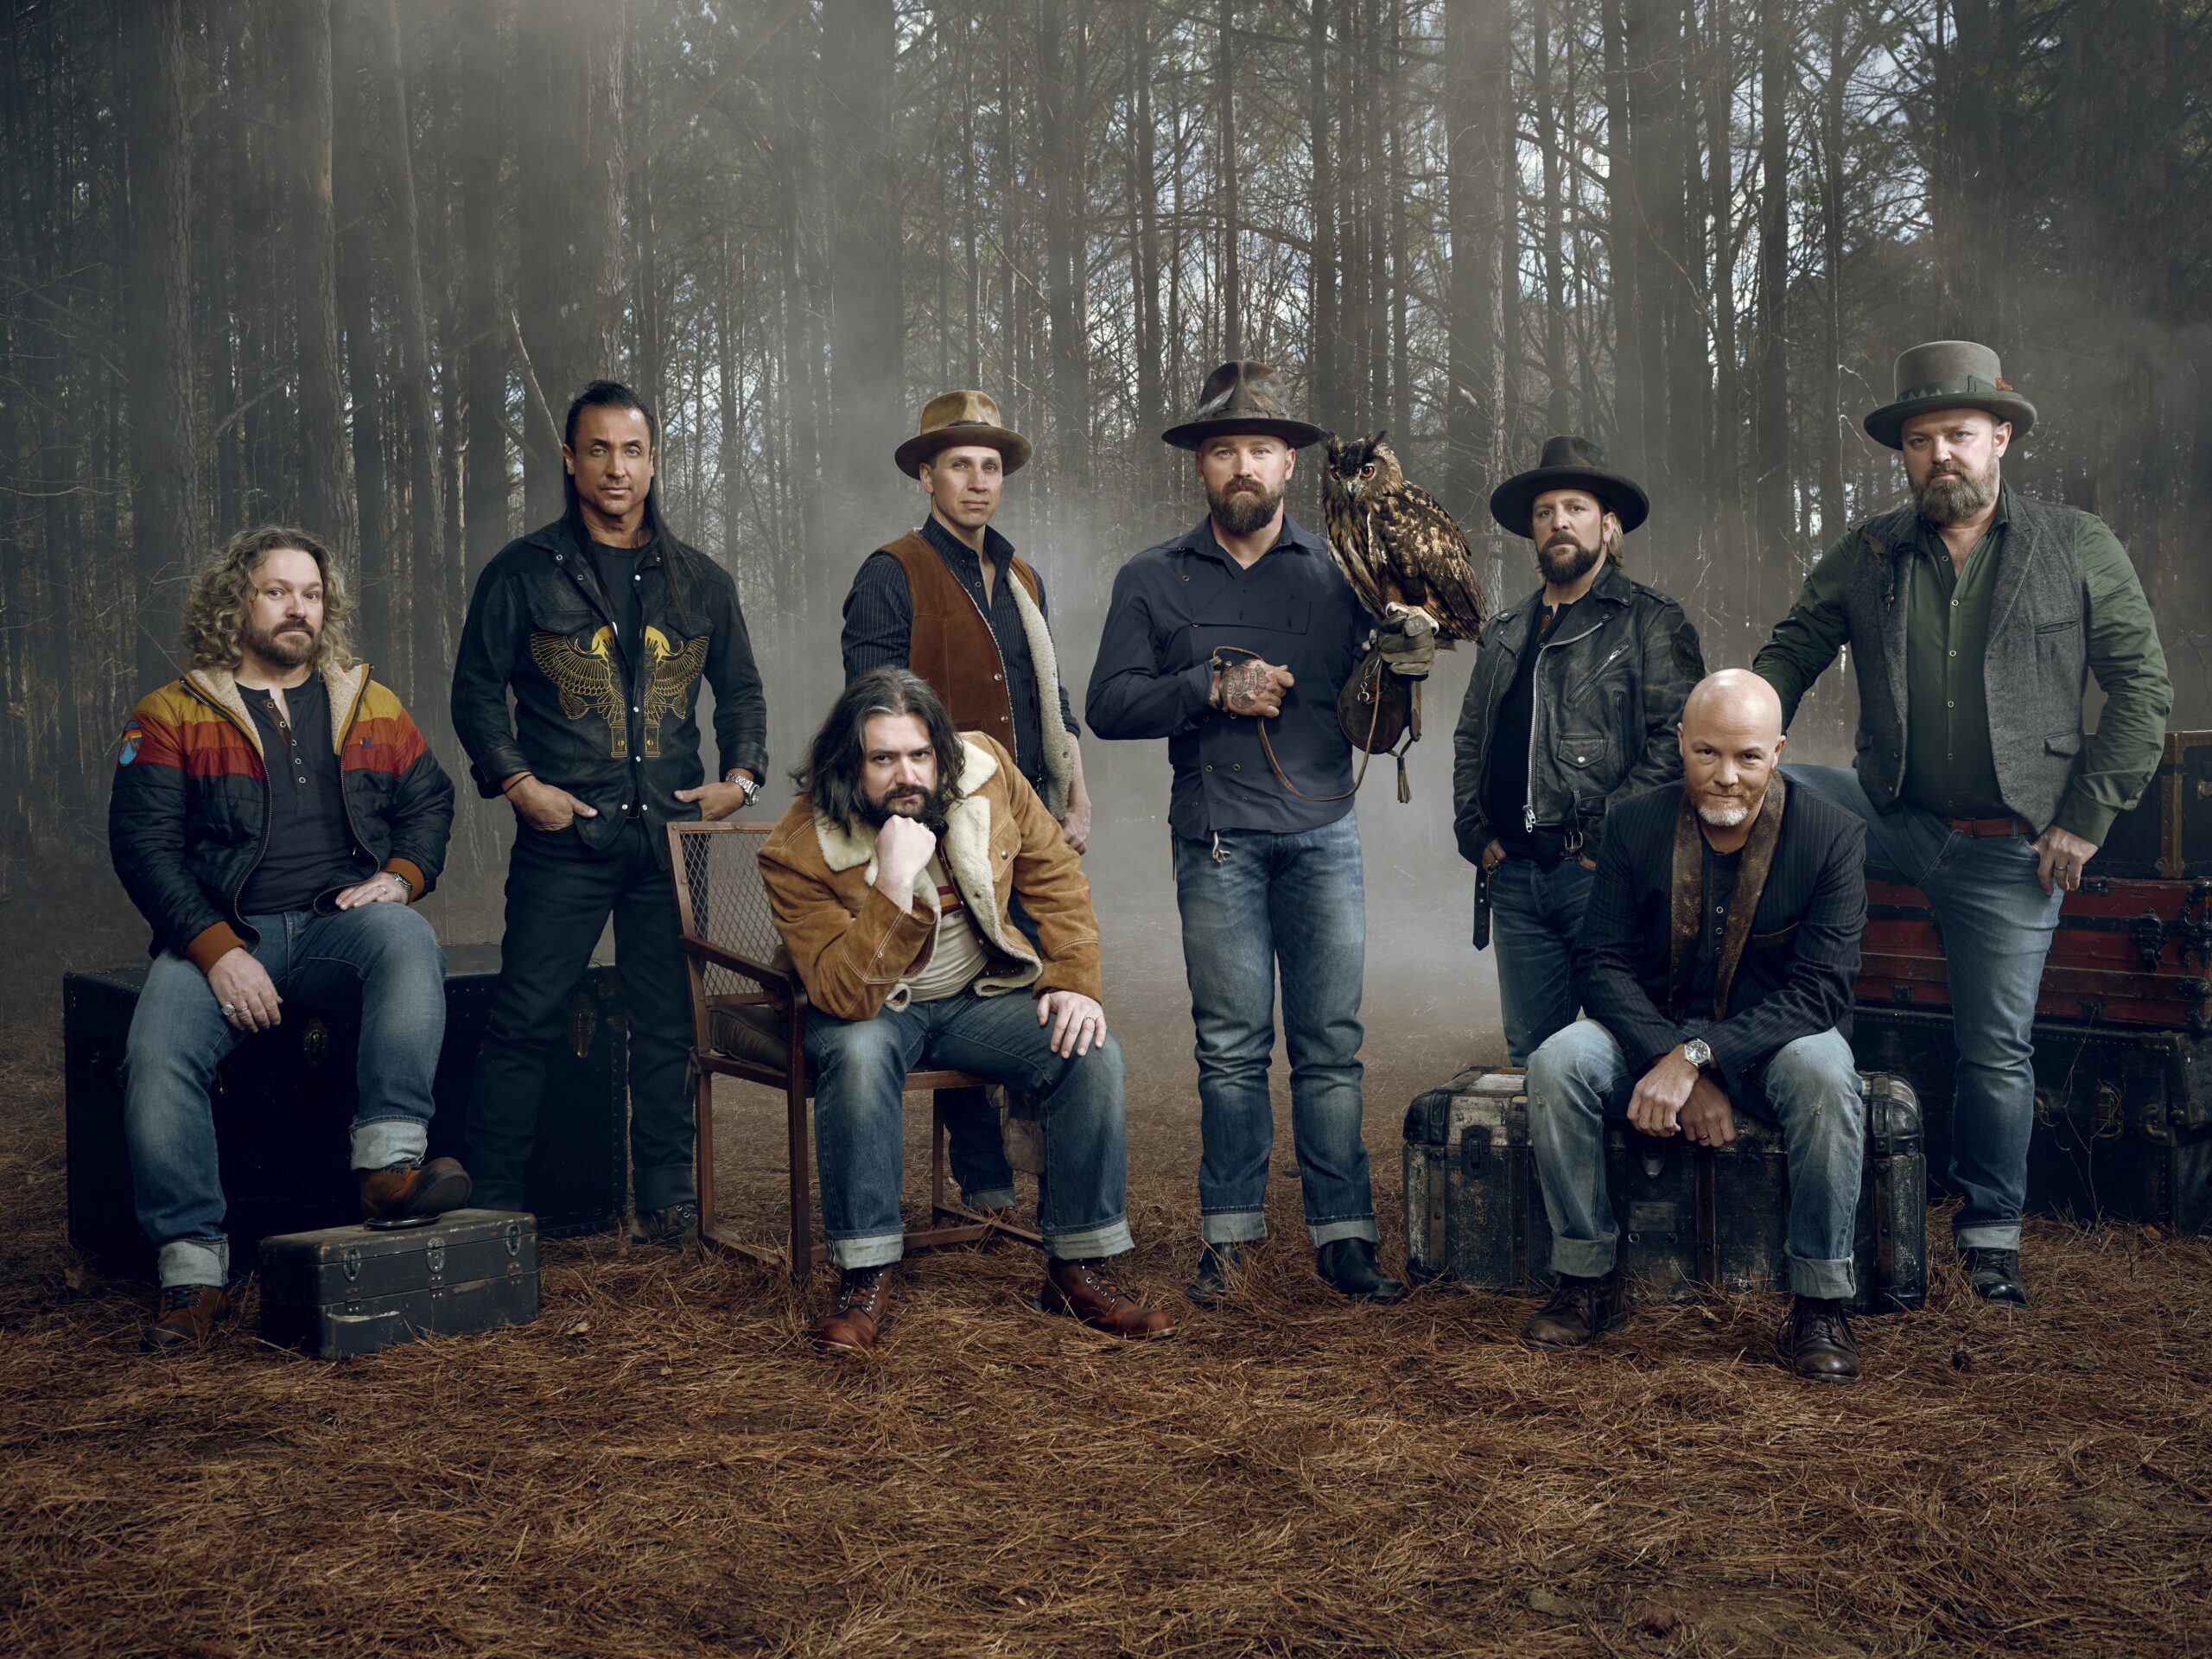 Last Chance to Win Tickets to See Zac Brown Band at Fenway Park!